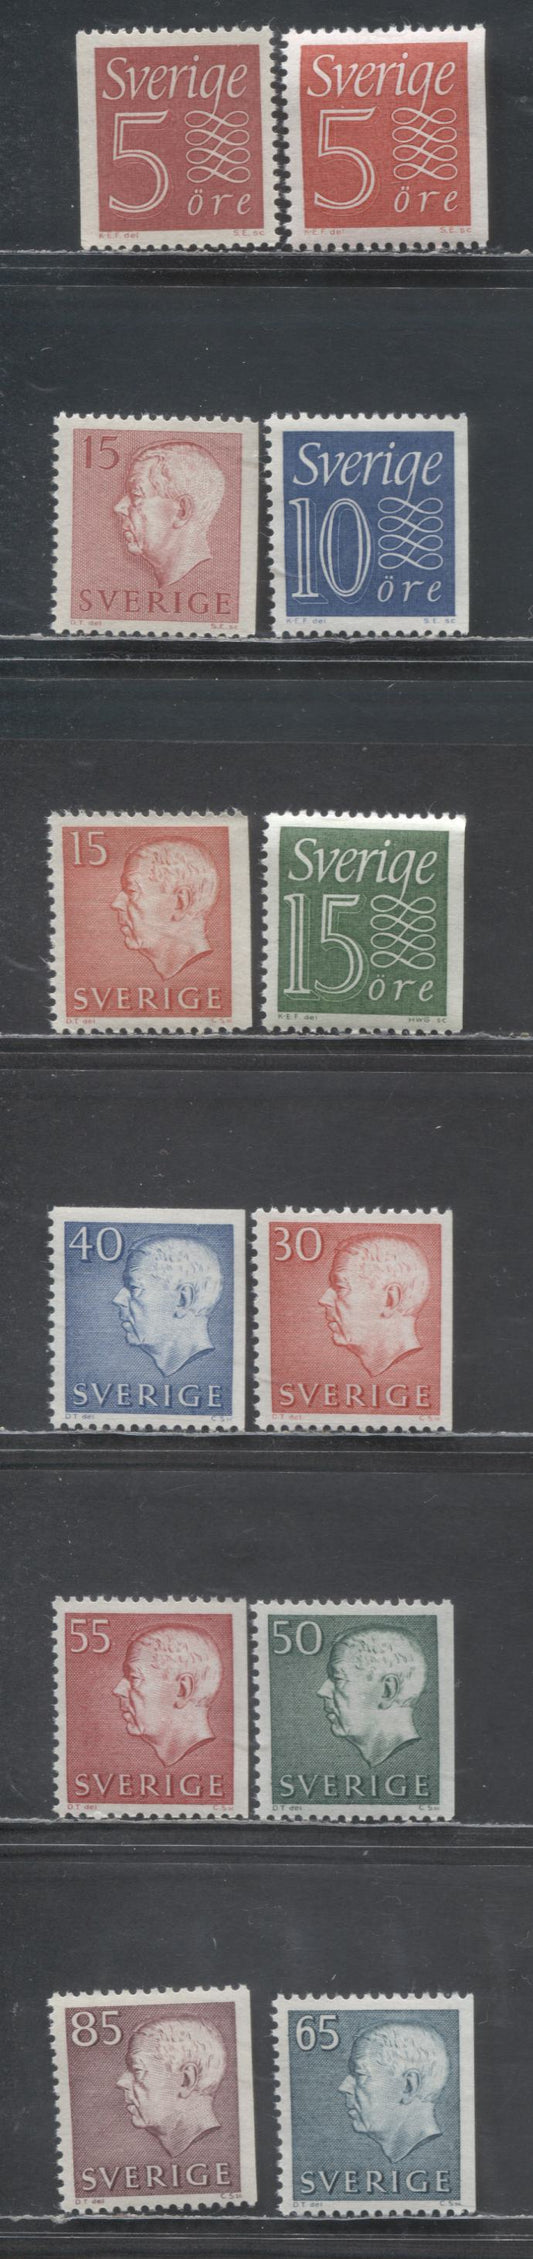 Lot 1 Sweden SC#513/672F 1957-1971 Numerals & Gustav VI Adolf Definitive Issue, Including Both Deep Red and Red Shades of 5 Ore, 12 VFNH Singles, Click on Listing to See ALL Pictures, 2017 Scott Cat. $10.75